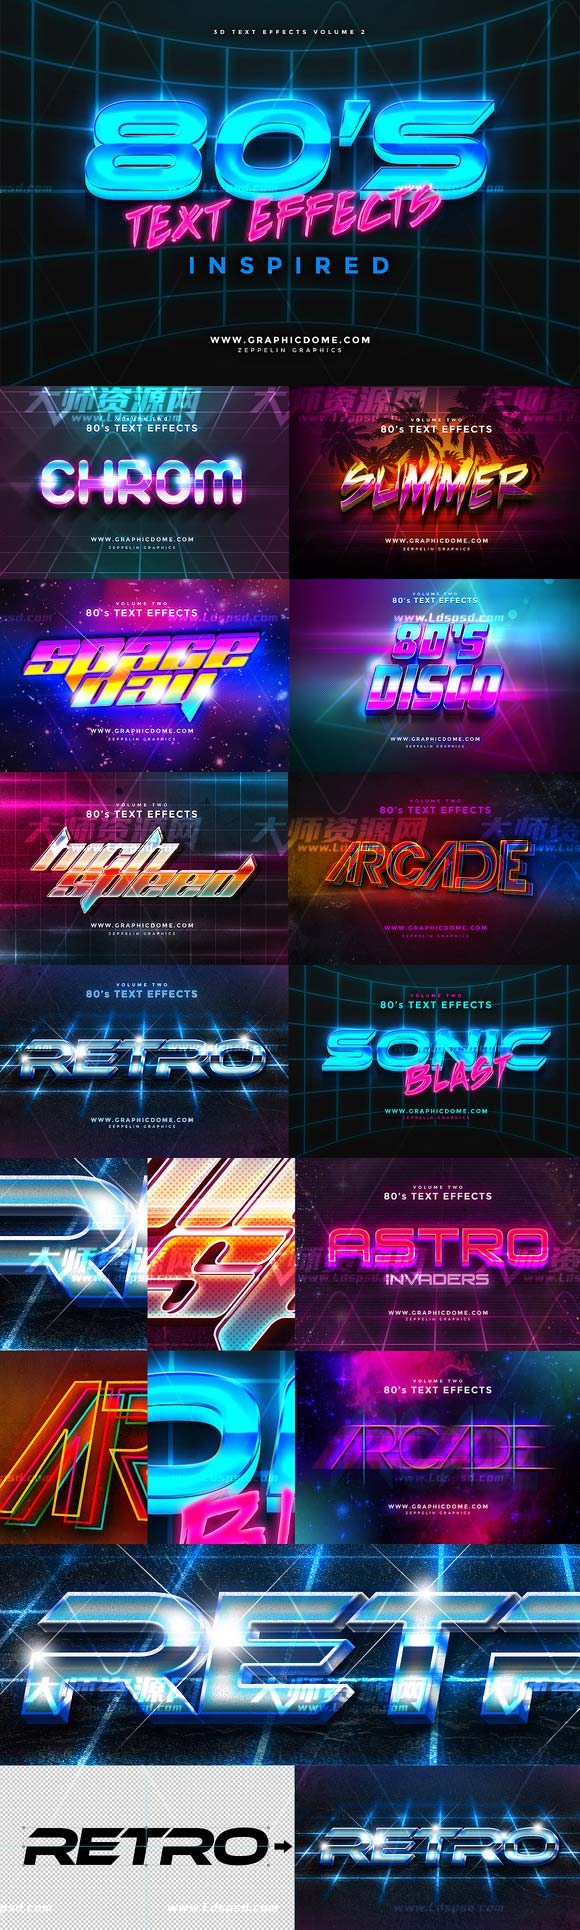 80s Text Effects,PS图层样式/3D文本模型